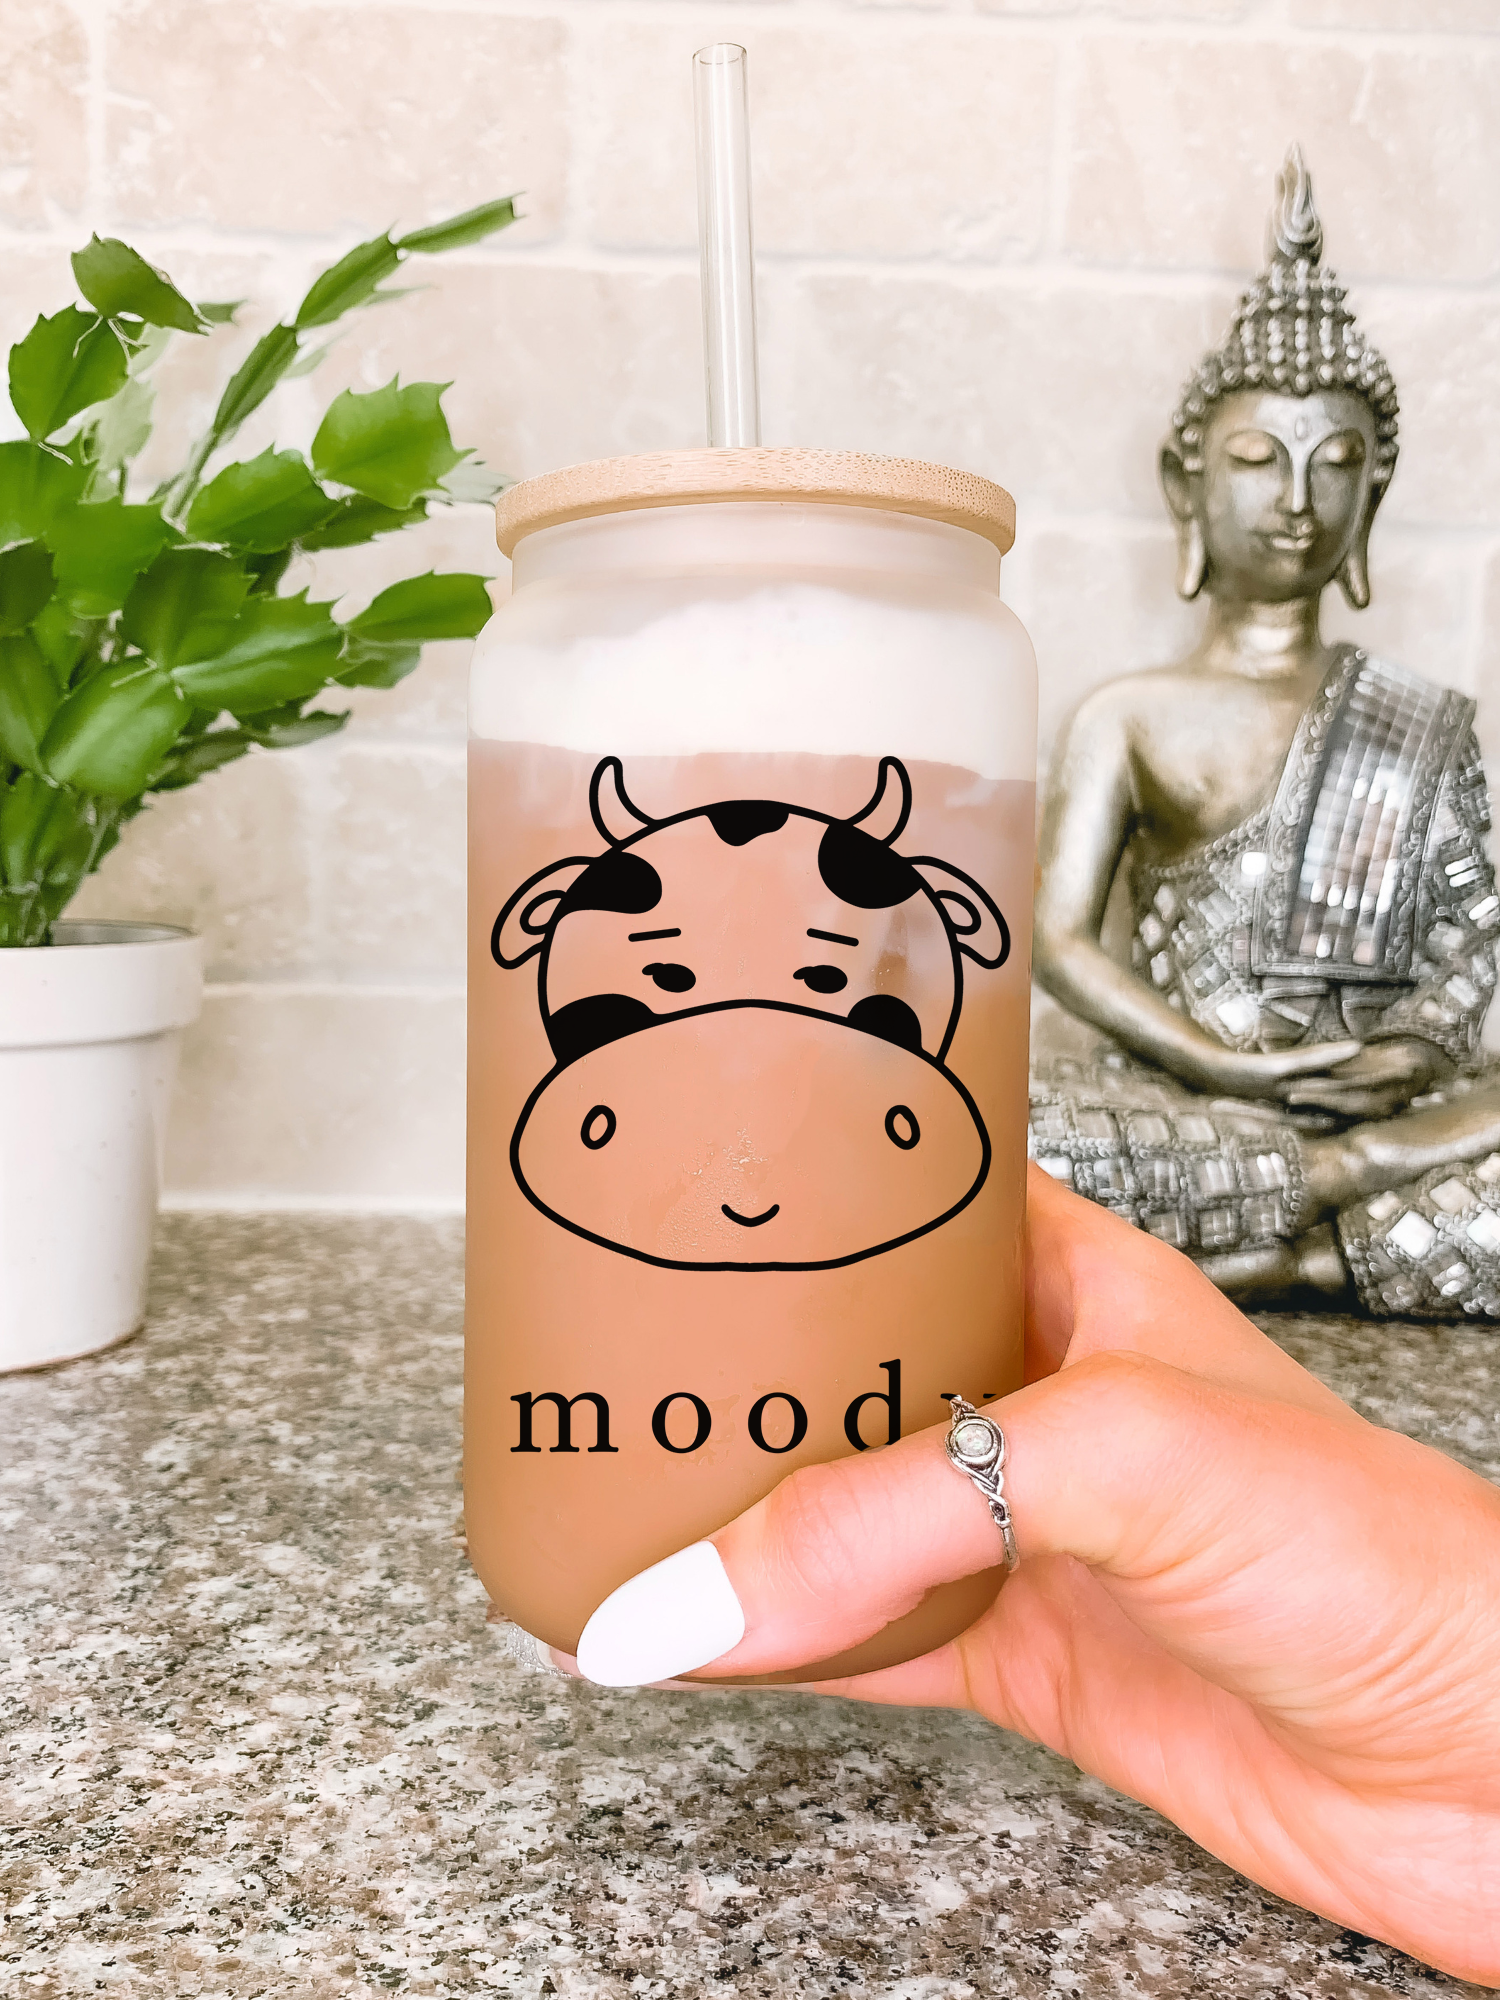 Cow Print Tumbler with Lid and Straw-Cute Cow Gifts for Women,Cow